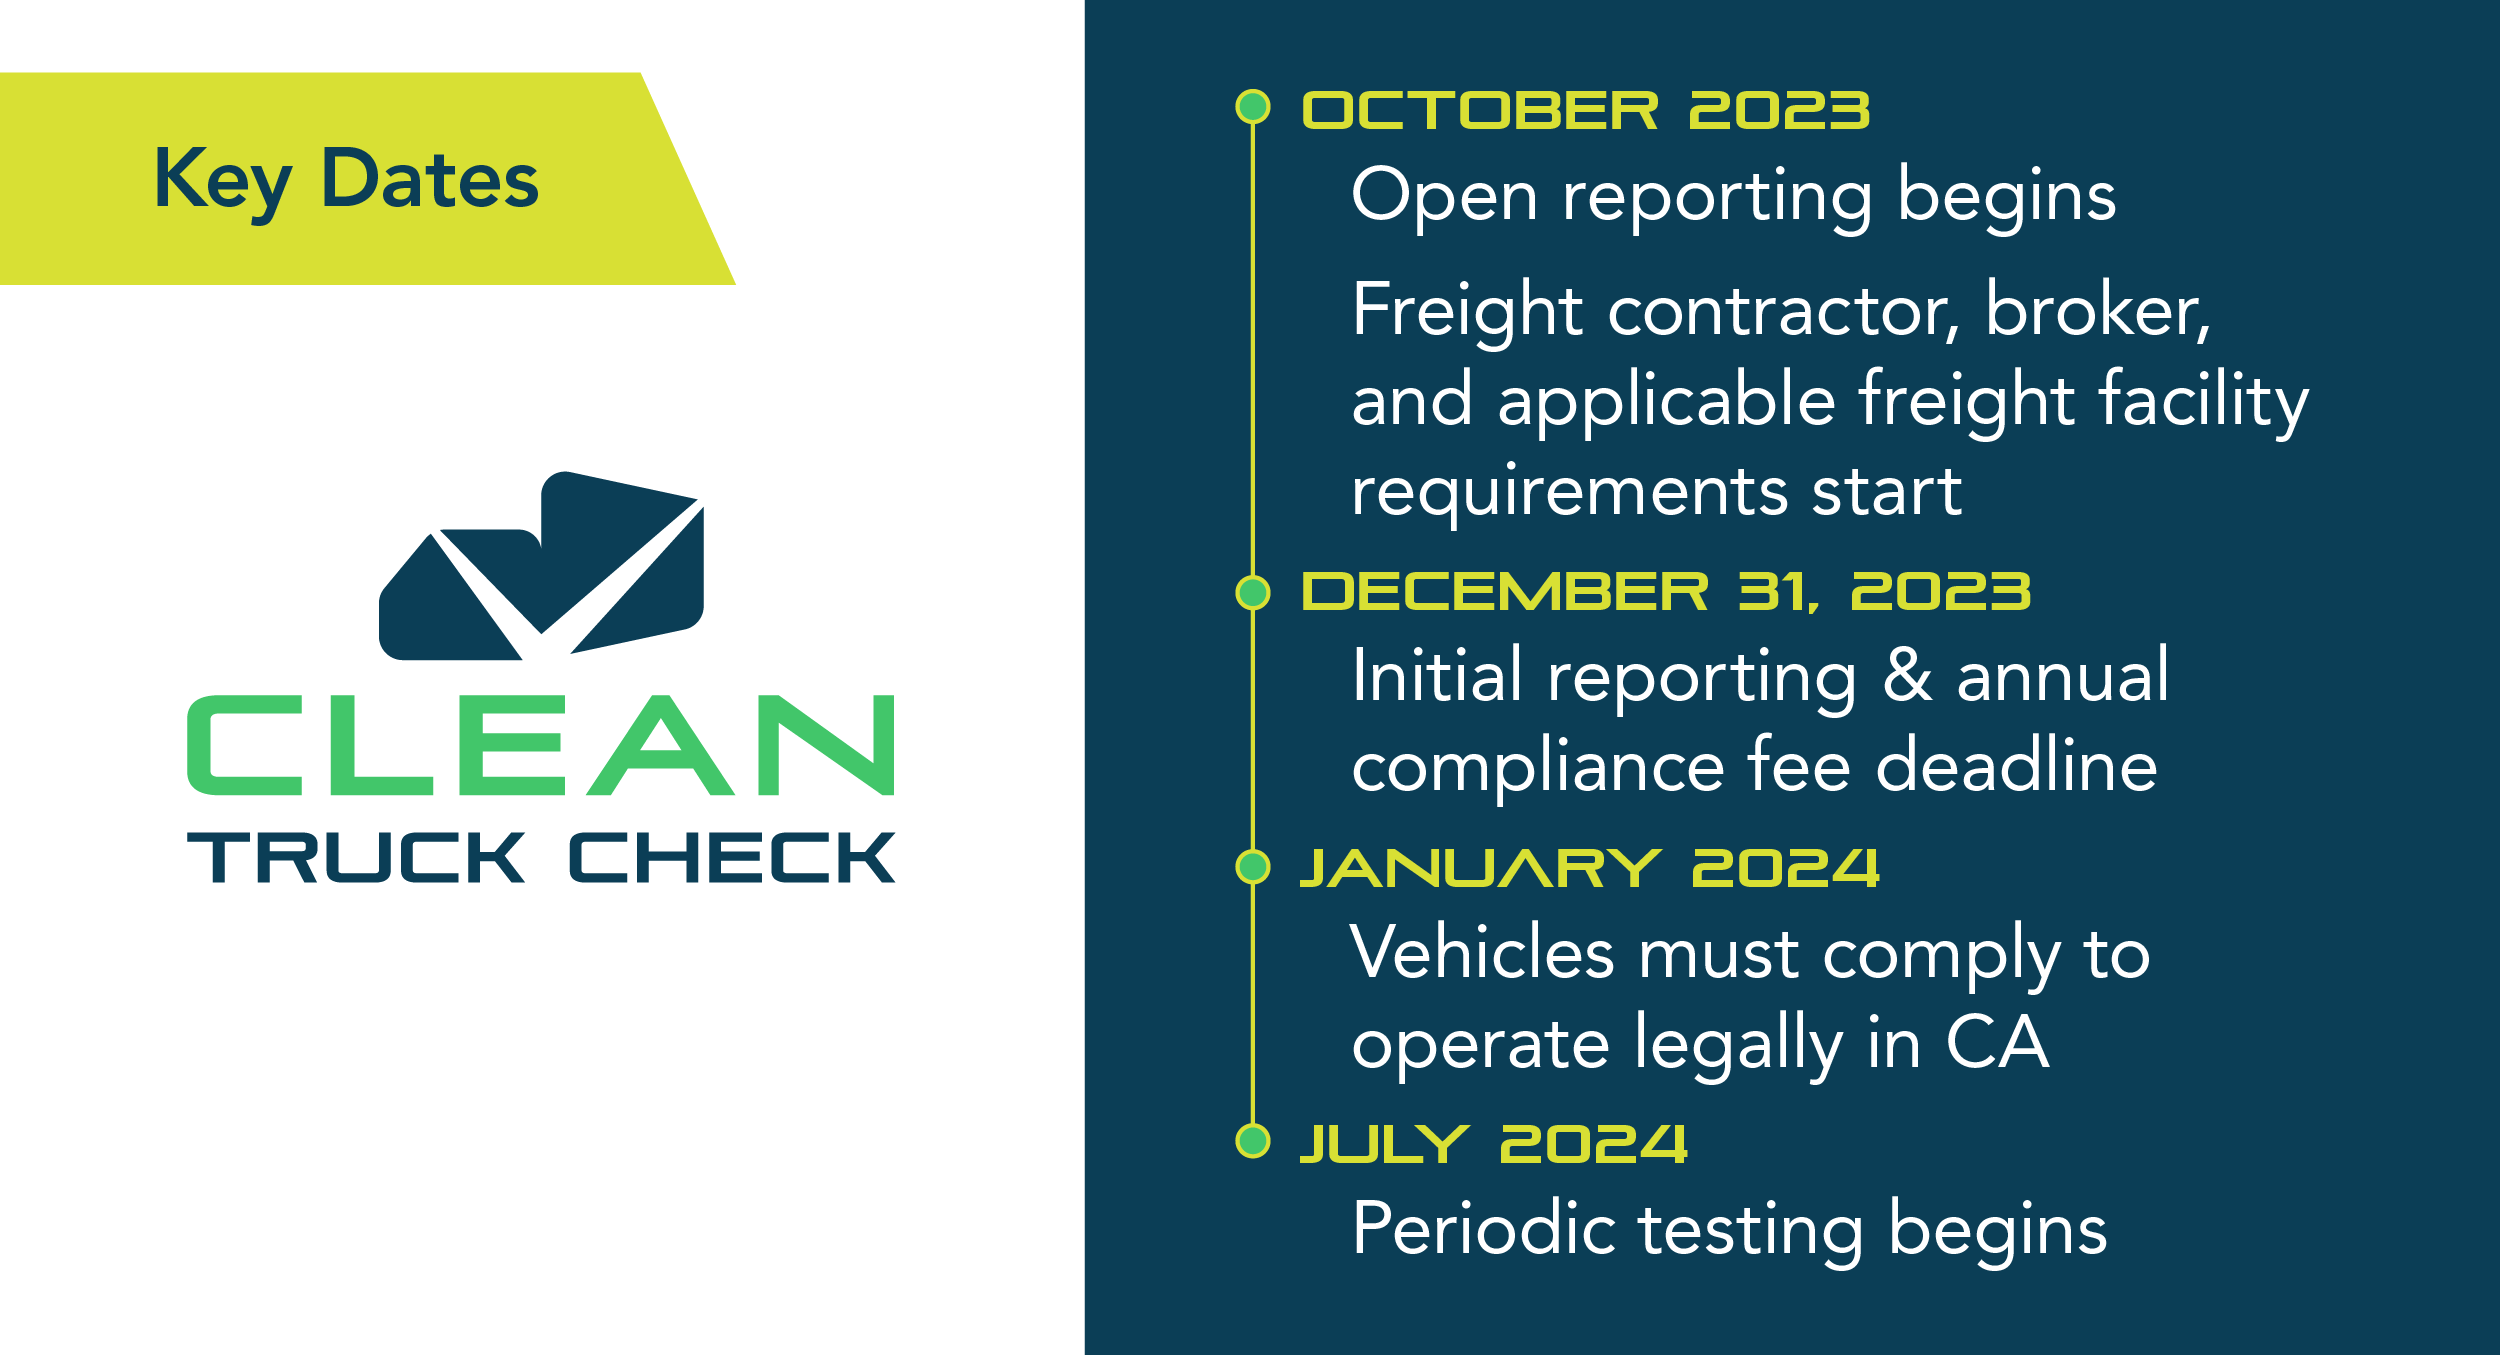 Clean Truck Check Key Dates: October 2023: open reporting begins. Freight contractor, broker, and applicable freight facility requirements start. December 31, 2023: Initial reporting & annual compliance fee deadline. January 2024: Vehicles must comply to operate legally in CA. July 2024: periodic testing begins. 